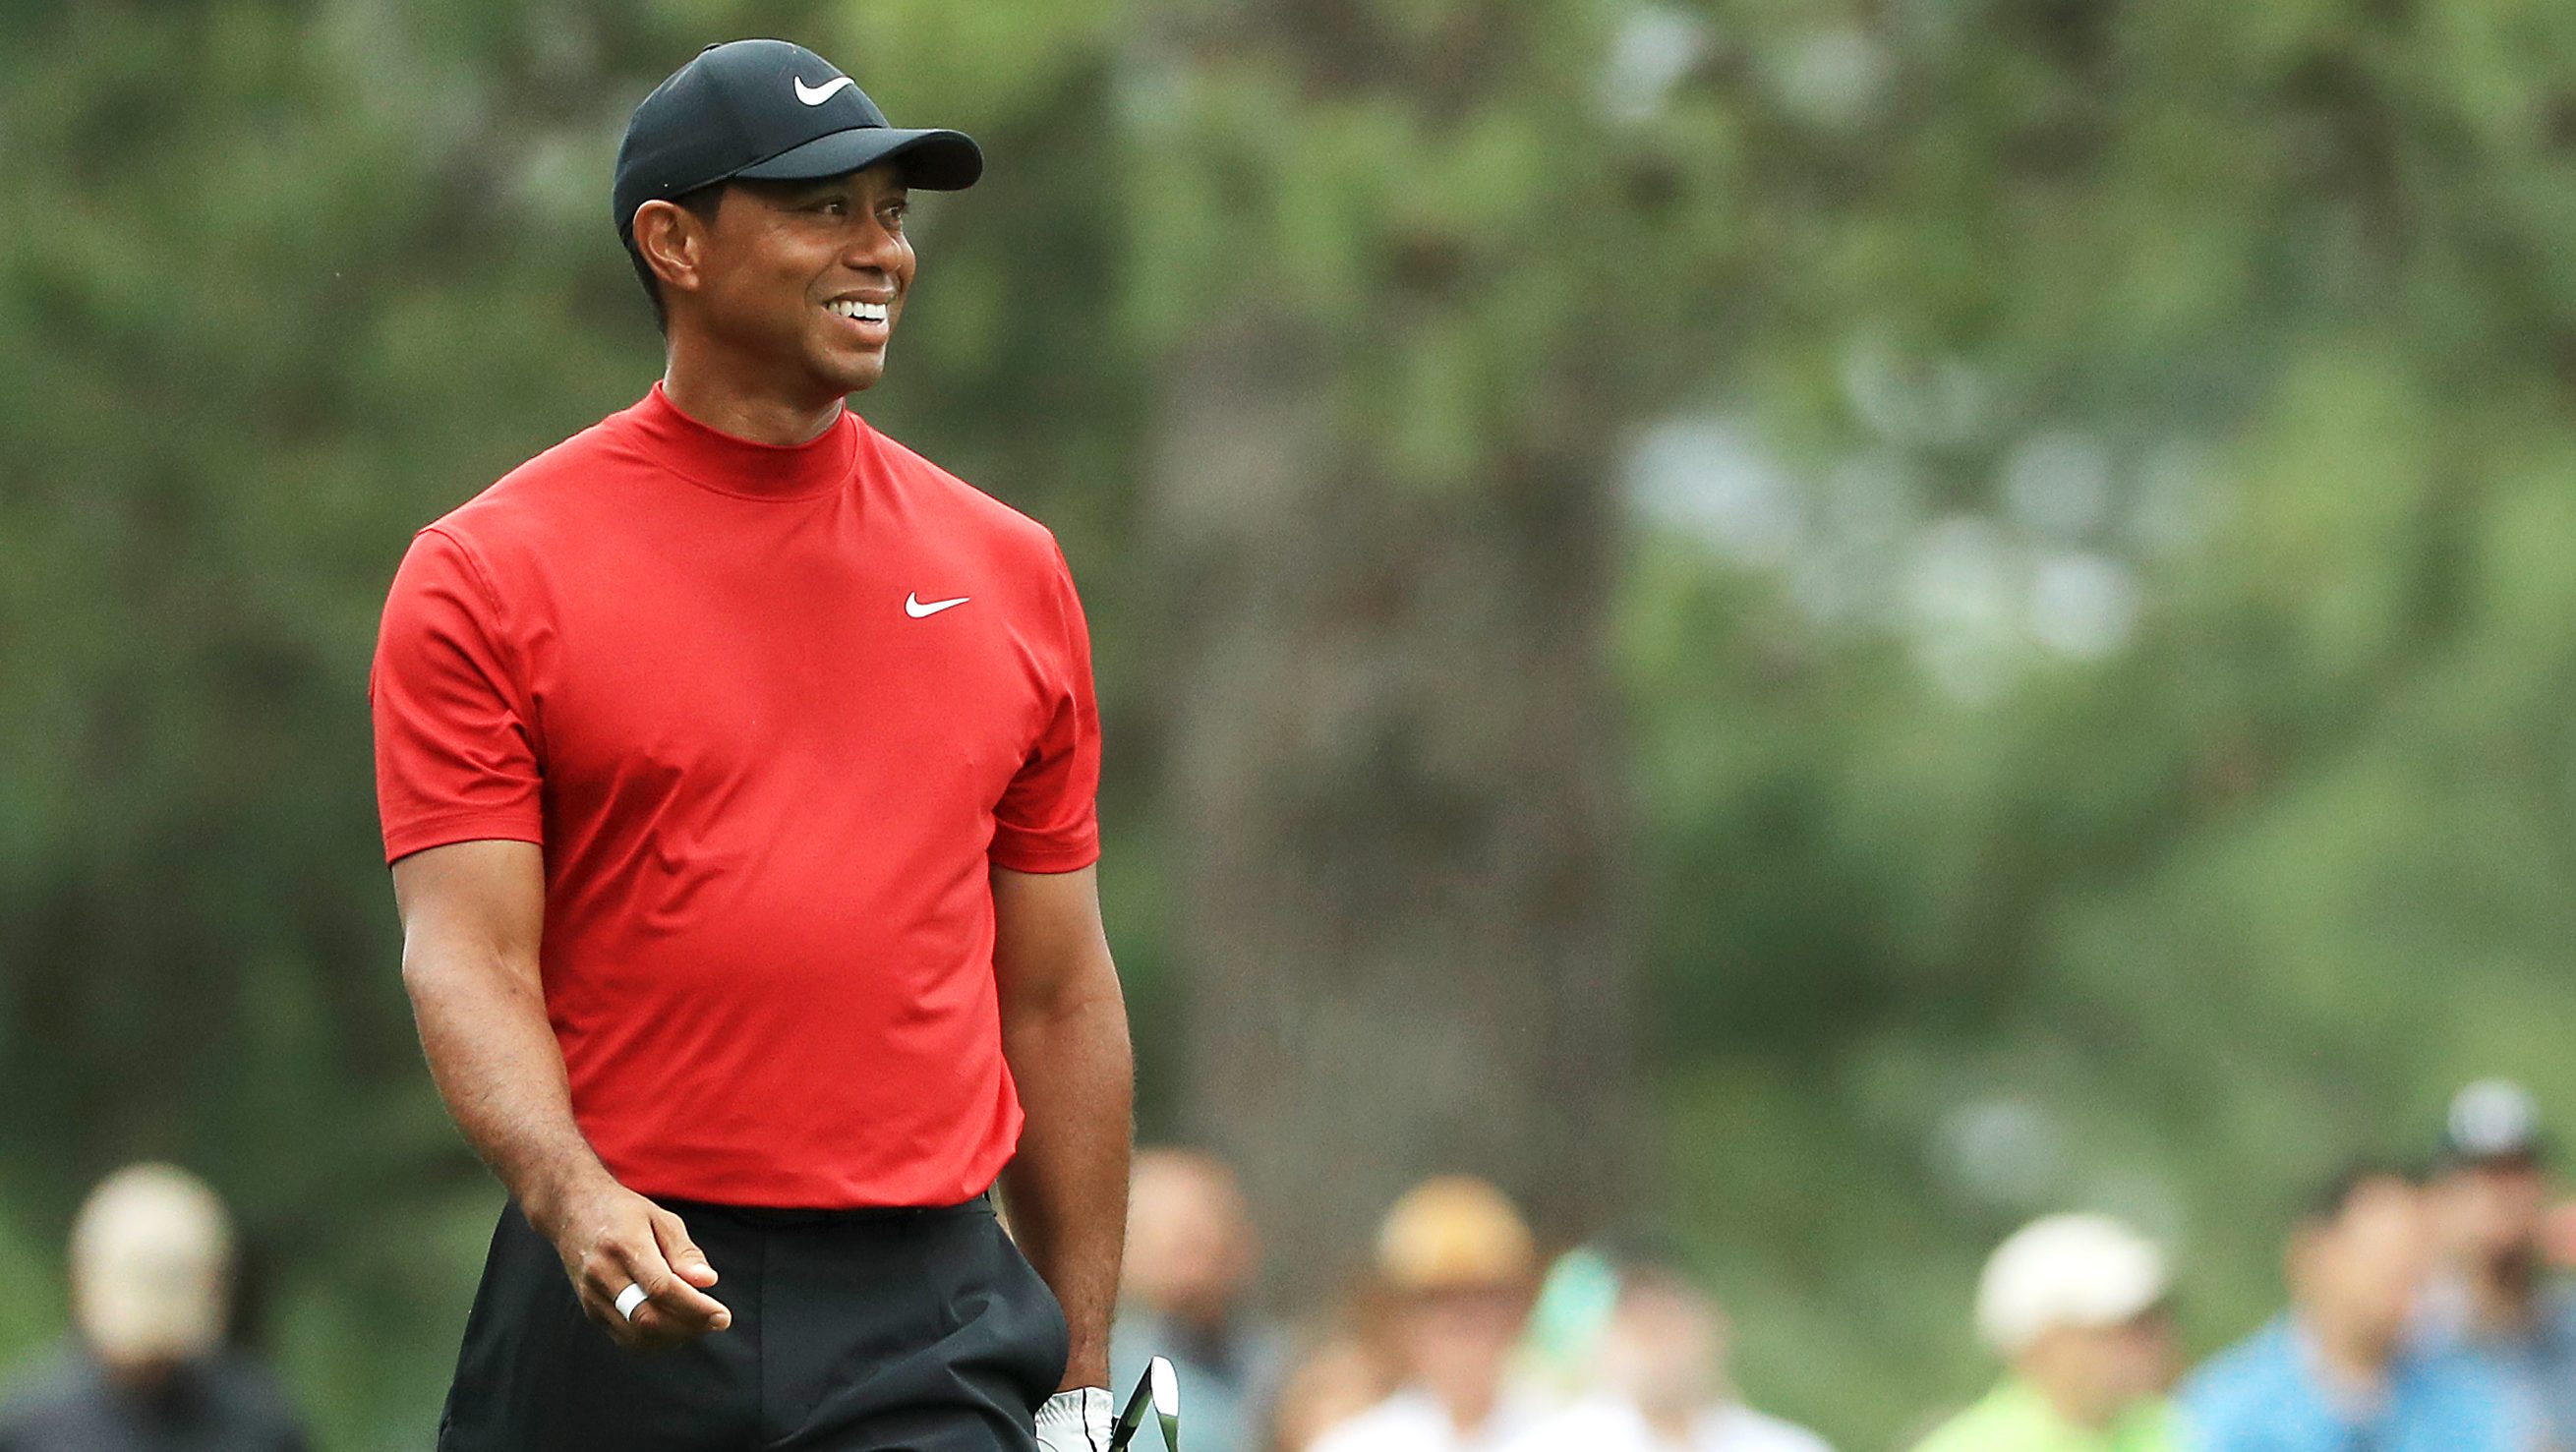 Tiger Woods & Masters: When Did He Last Win a Major? | Heavy.com